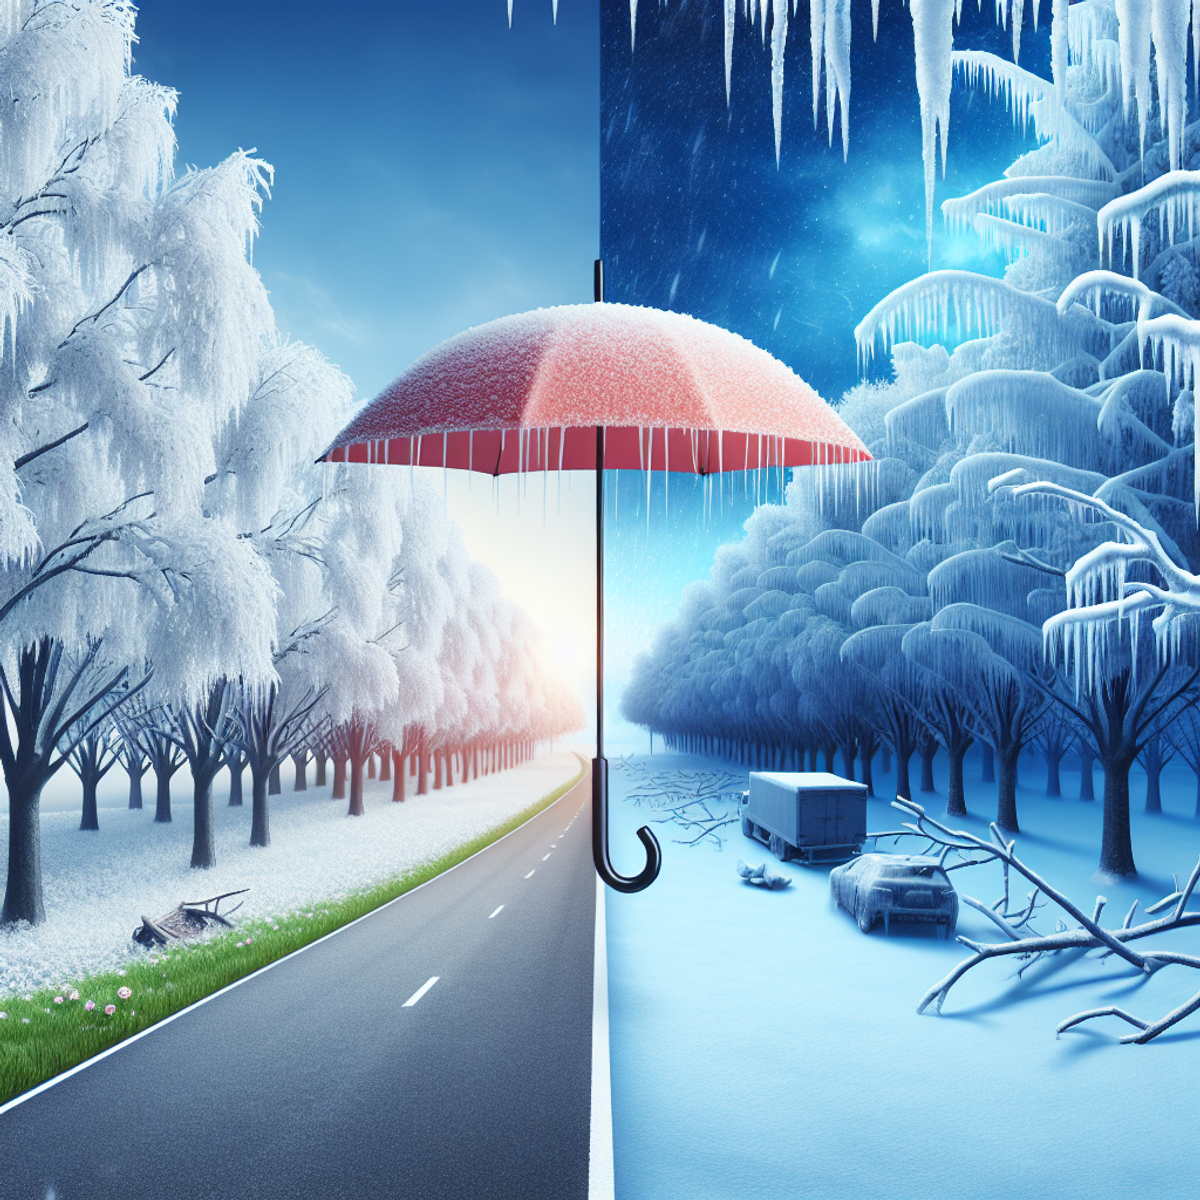 An icy landscape with sleet-covered trees, an open umbrella straddling serene and storm-ravaged scenes.